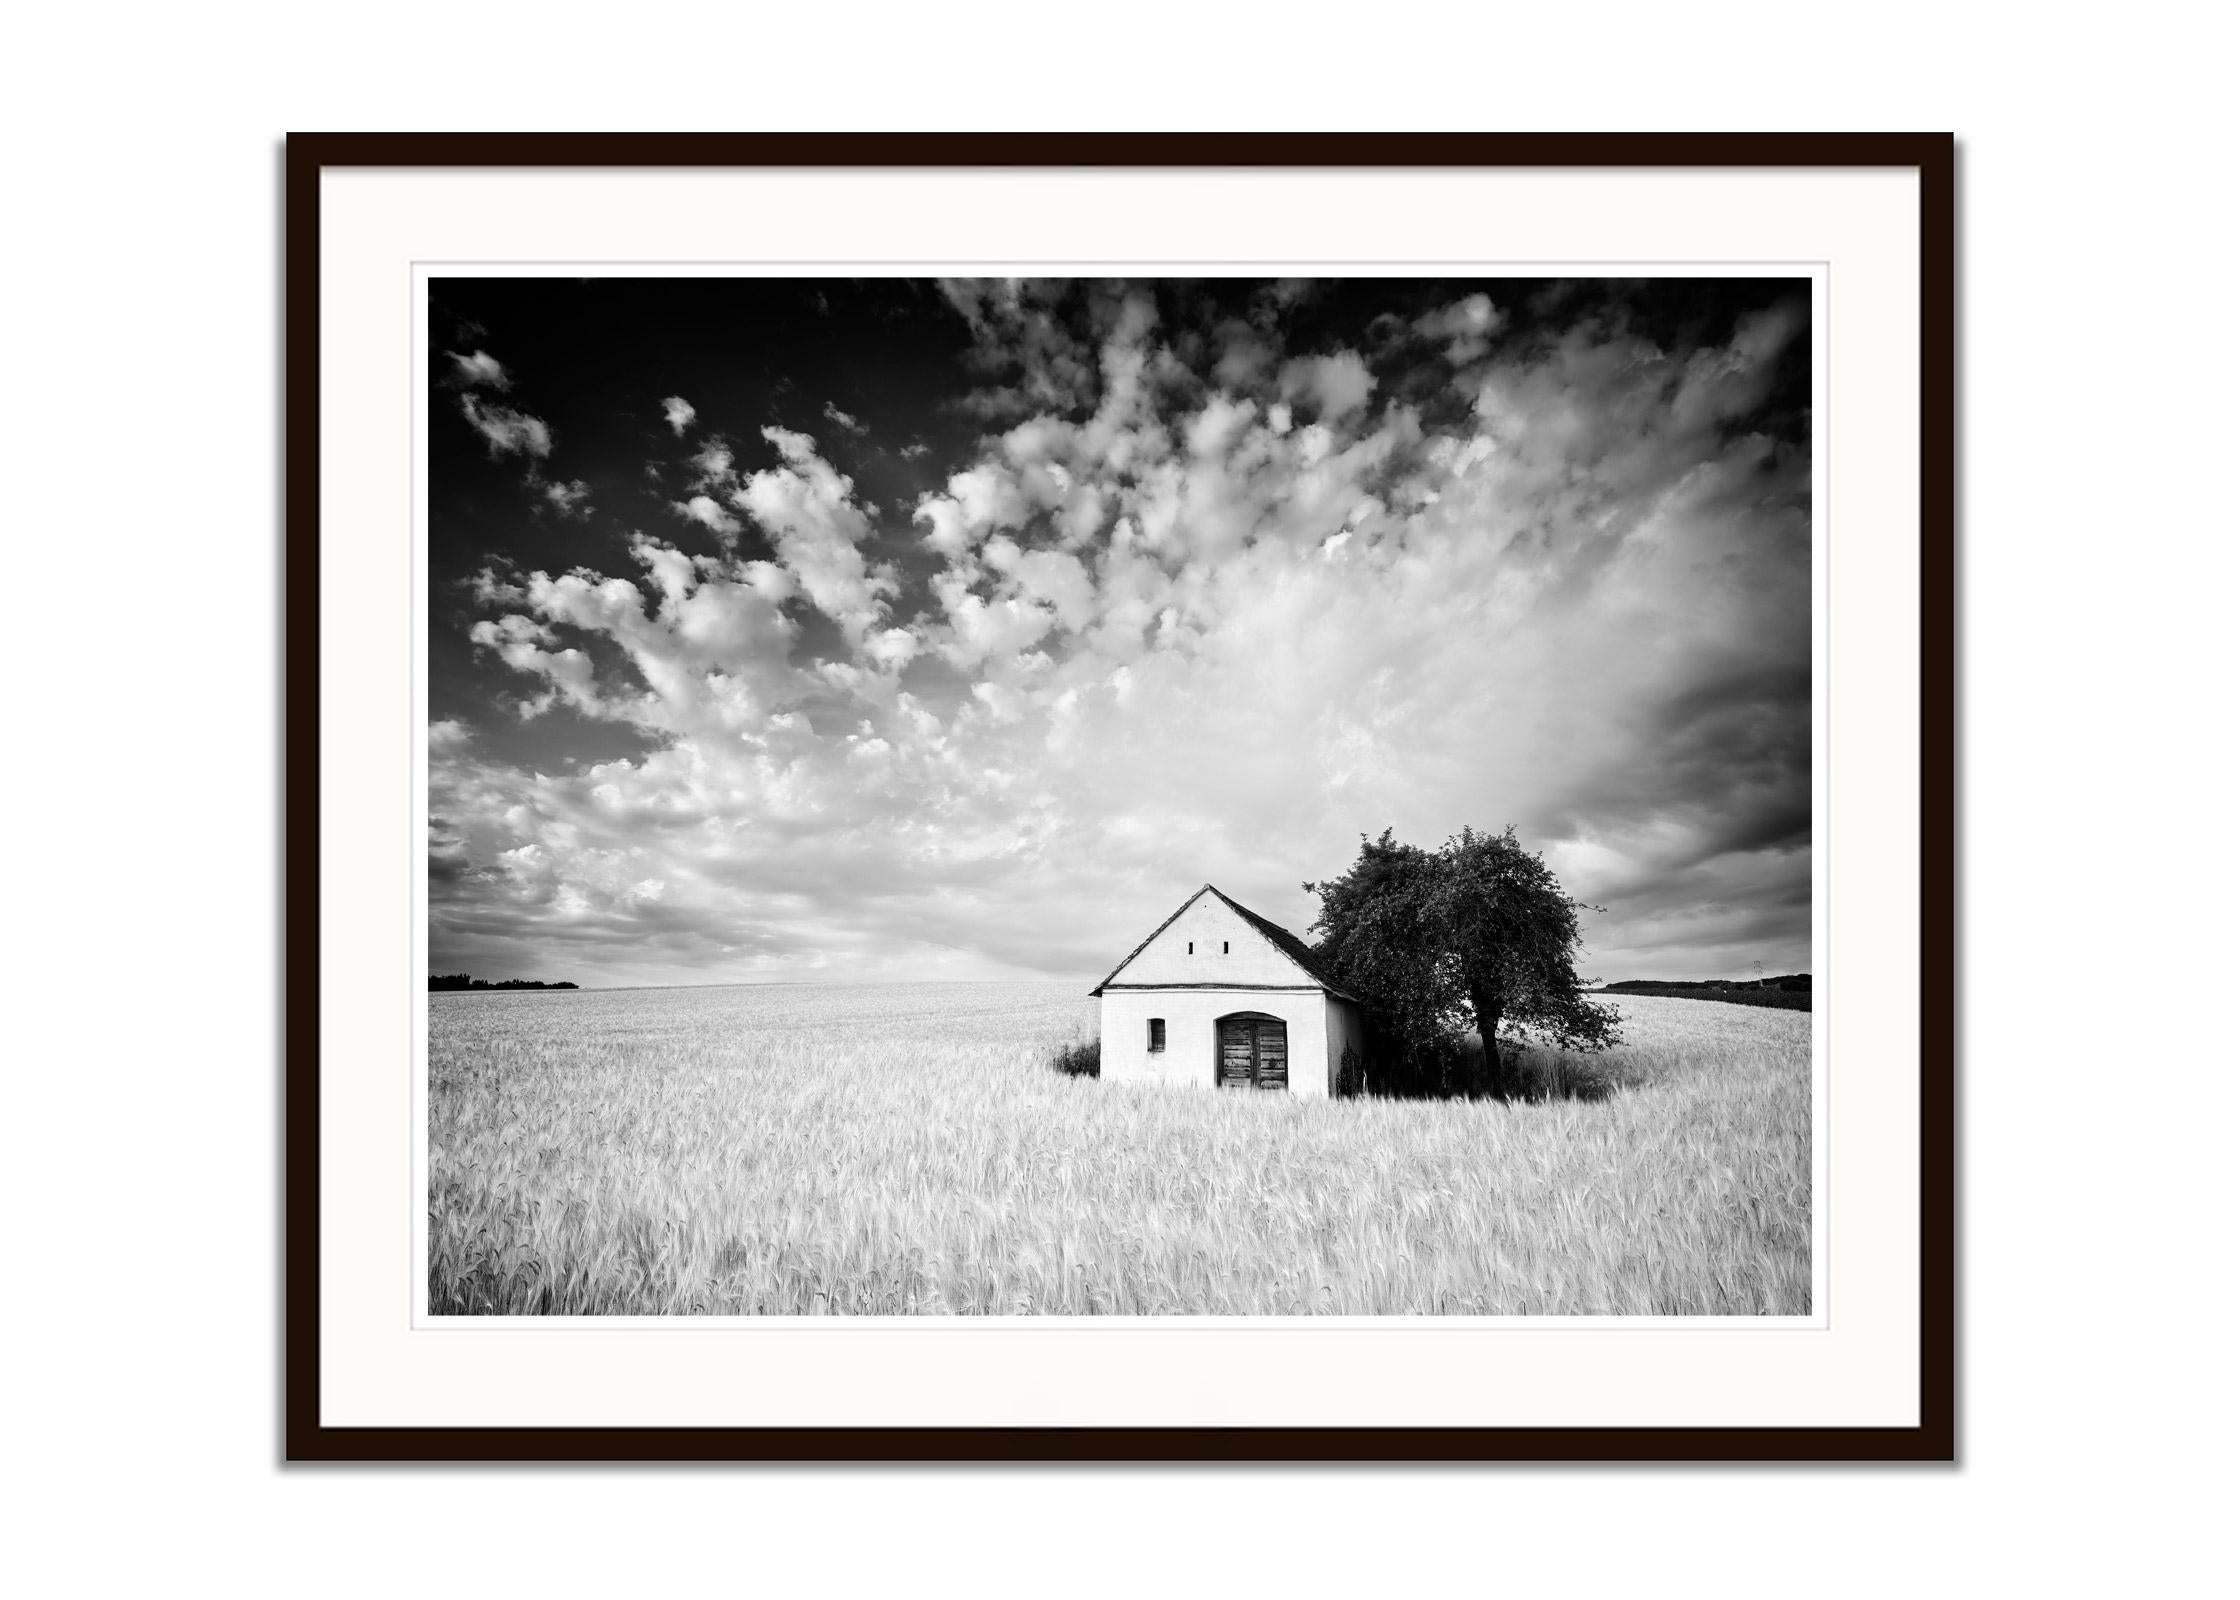 Black and white fine art landscape photography print. Wine press house in wheat field, nice clouds, storm, Austria. Archival pigment ink print, edition of 7. Signed, titled, dated and numbered by artist. Certificate of authenticity included. Printed